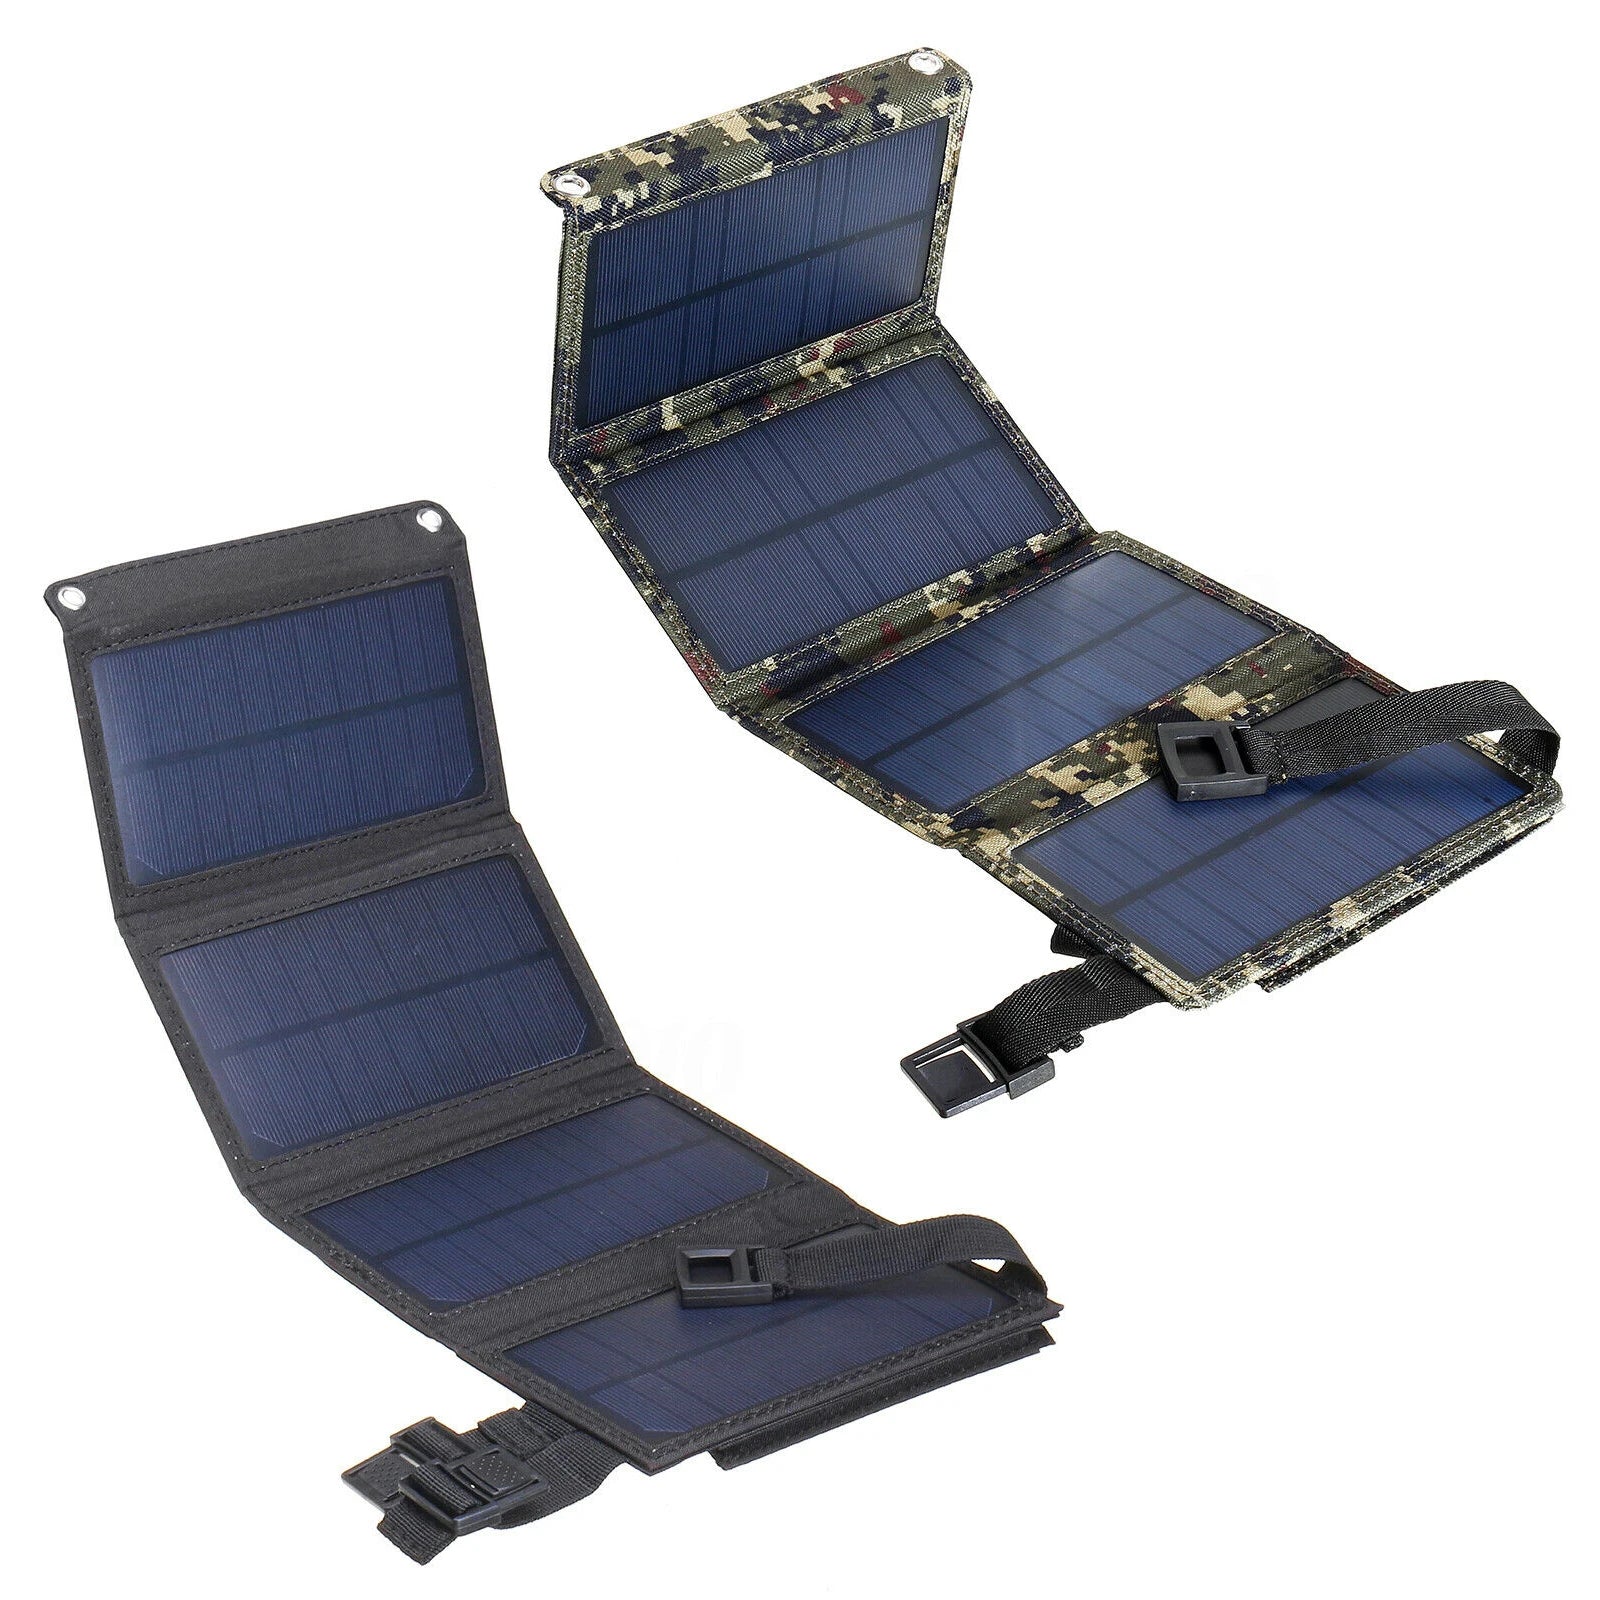 20W Outdoor Foldable Solar Panel, Compact design with a foldable layout makes it easy to store and transport.